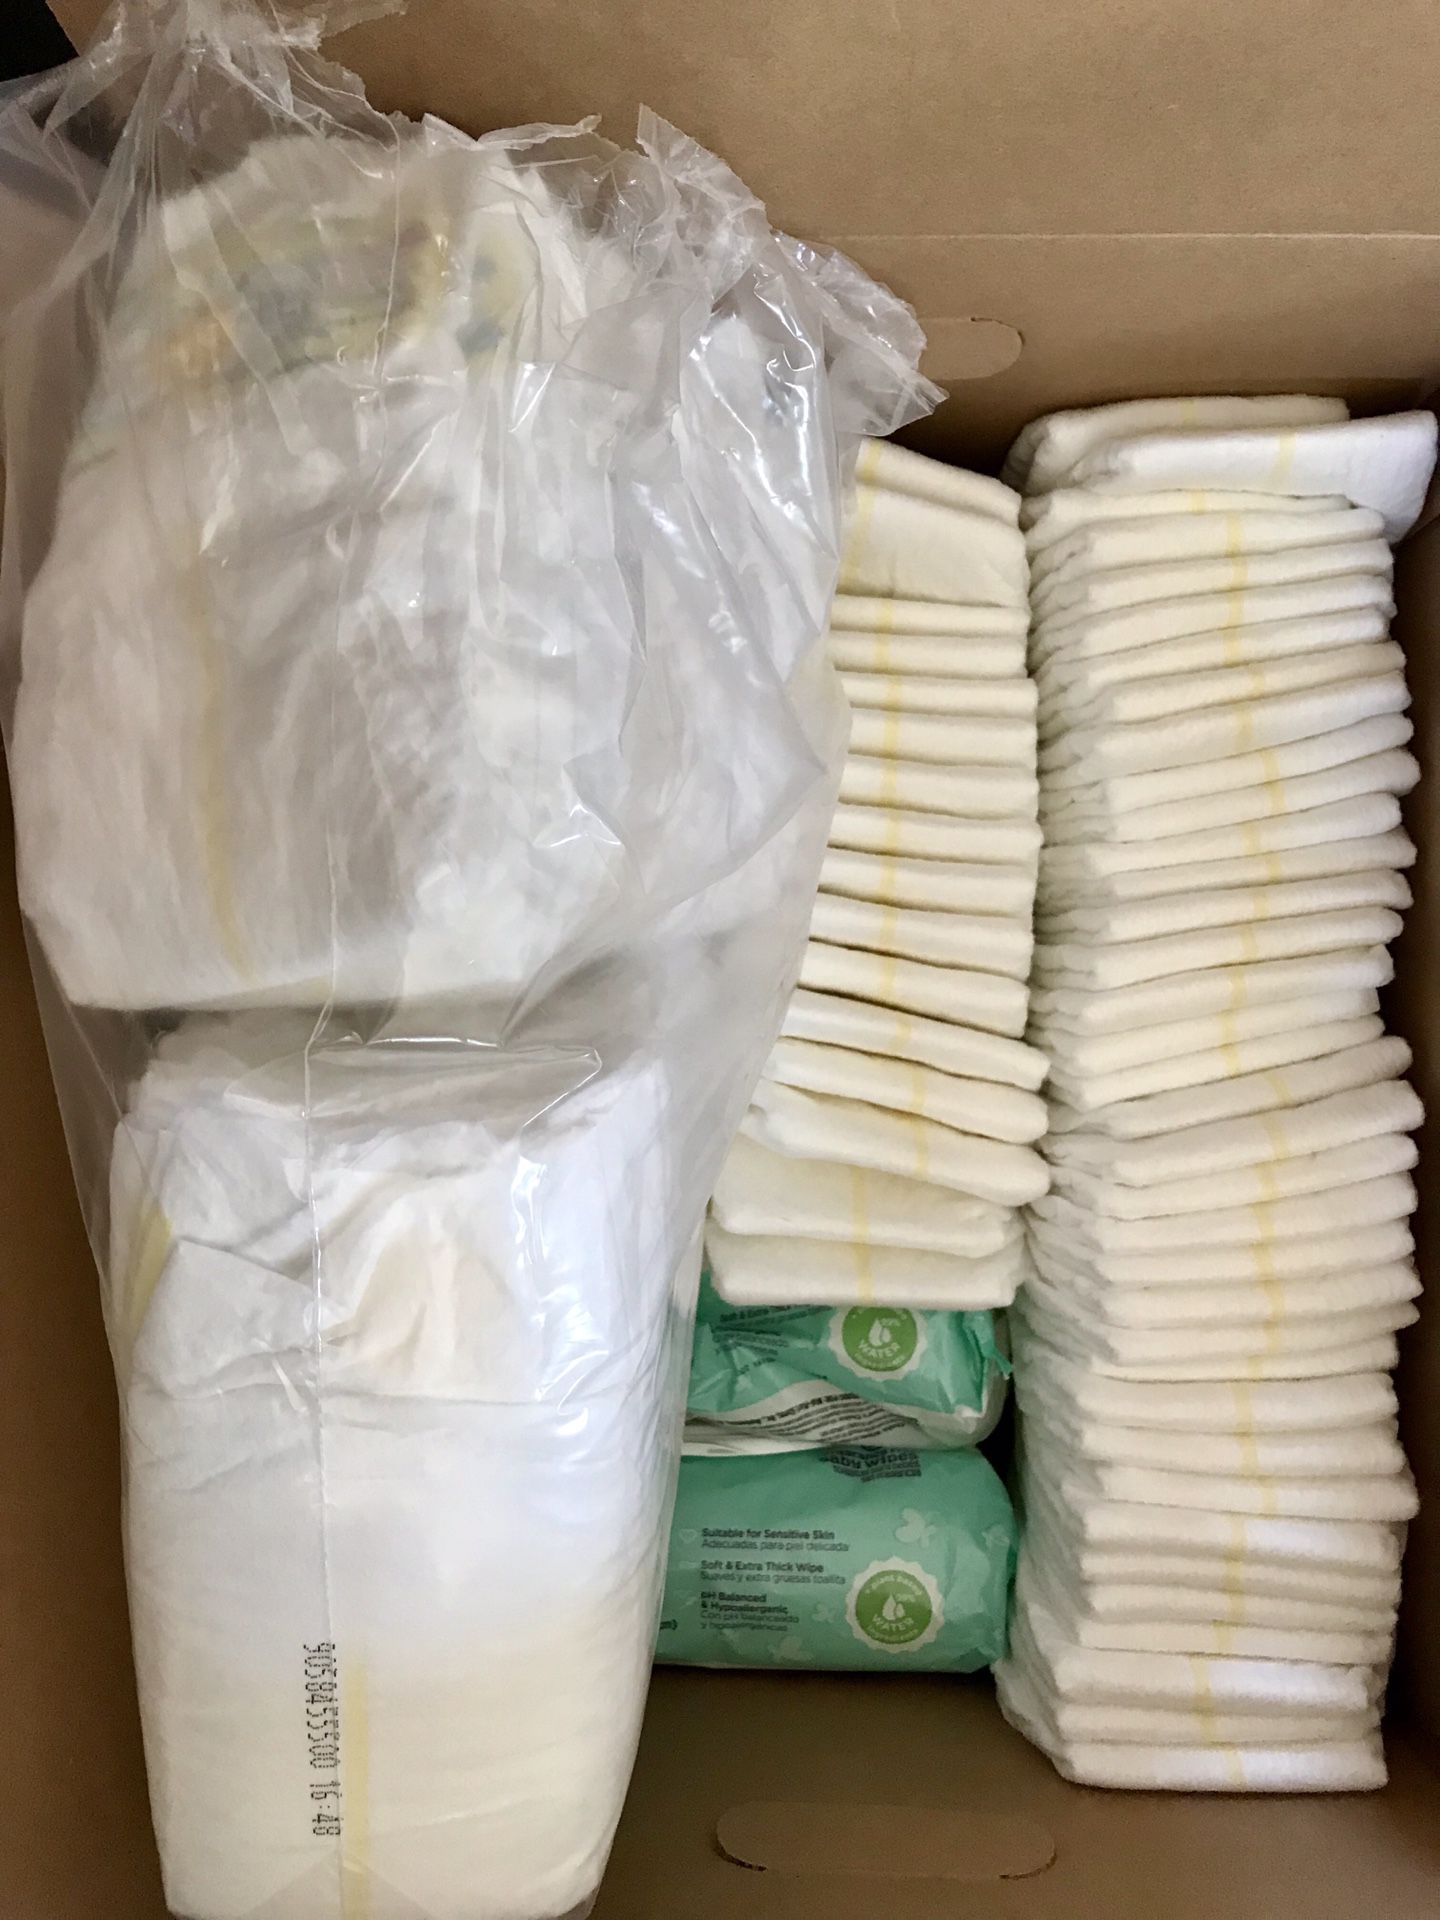 Pampers size 1 disposable diapers and wipes